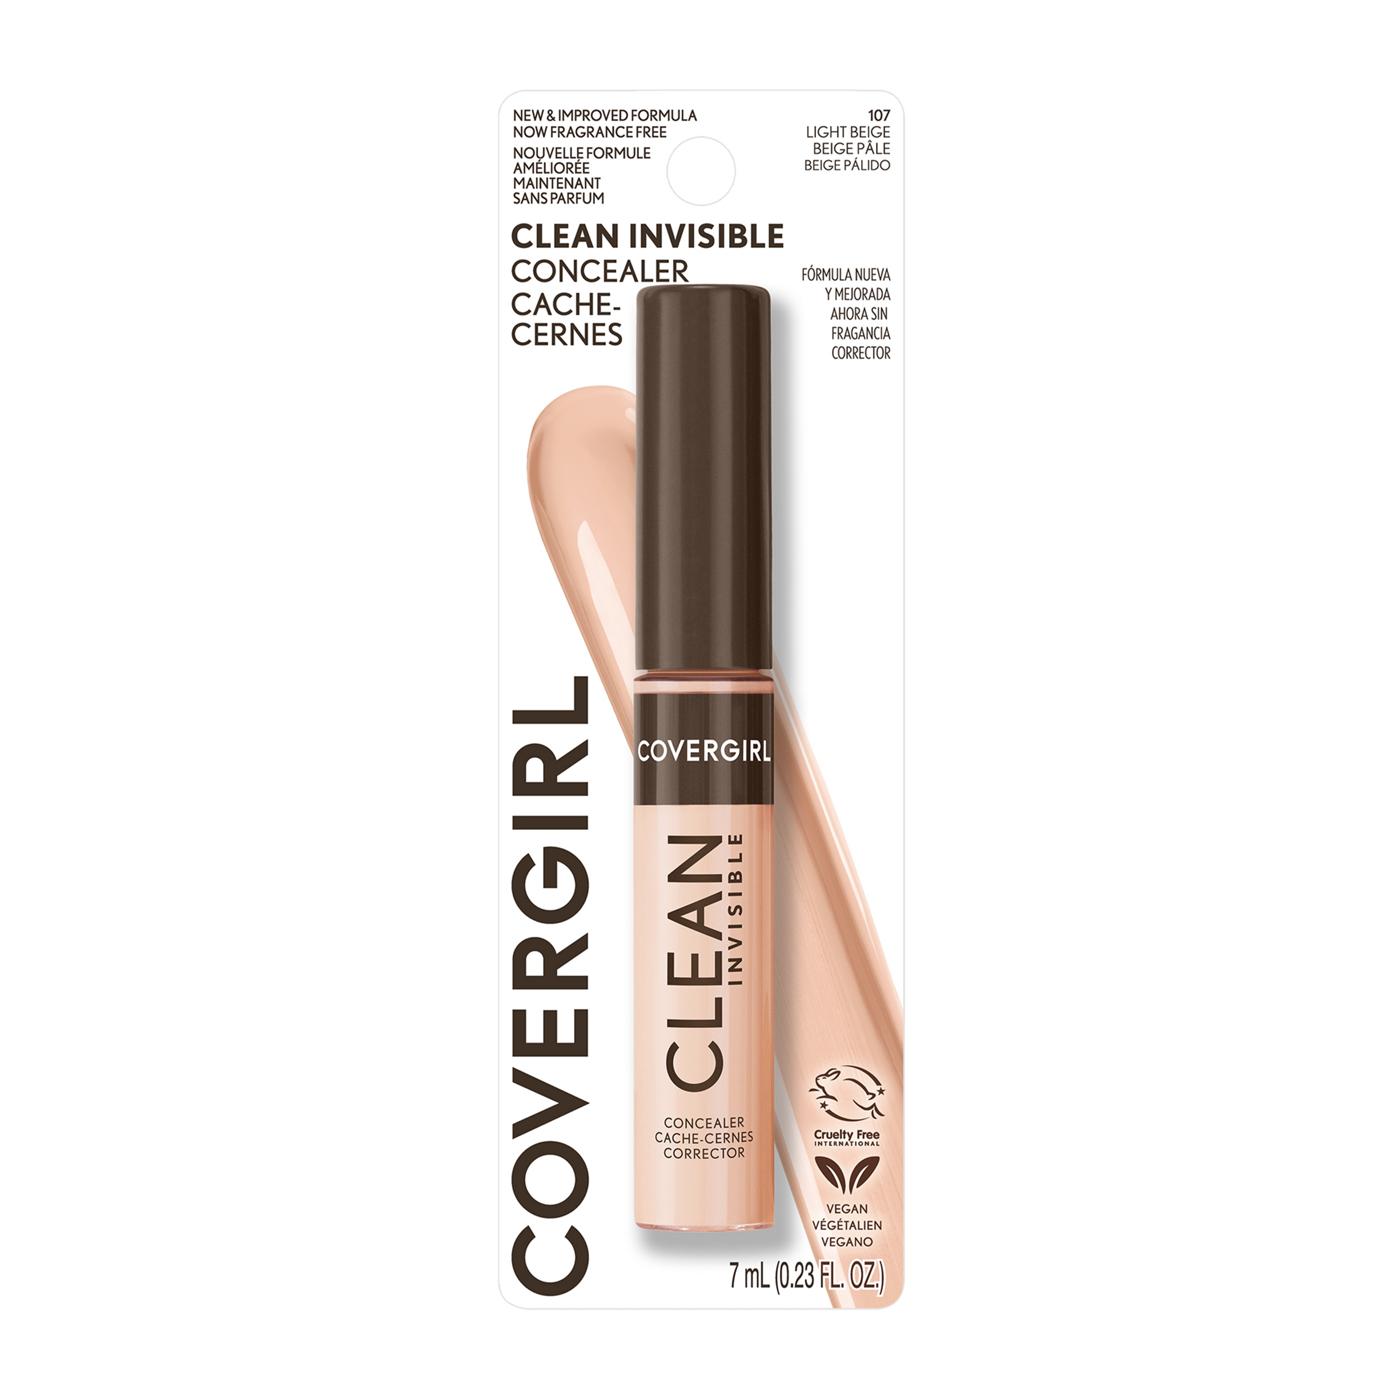 Covergirl Clean Invisible Concealer - Light Beige; image 1 of 15